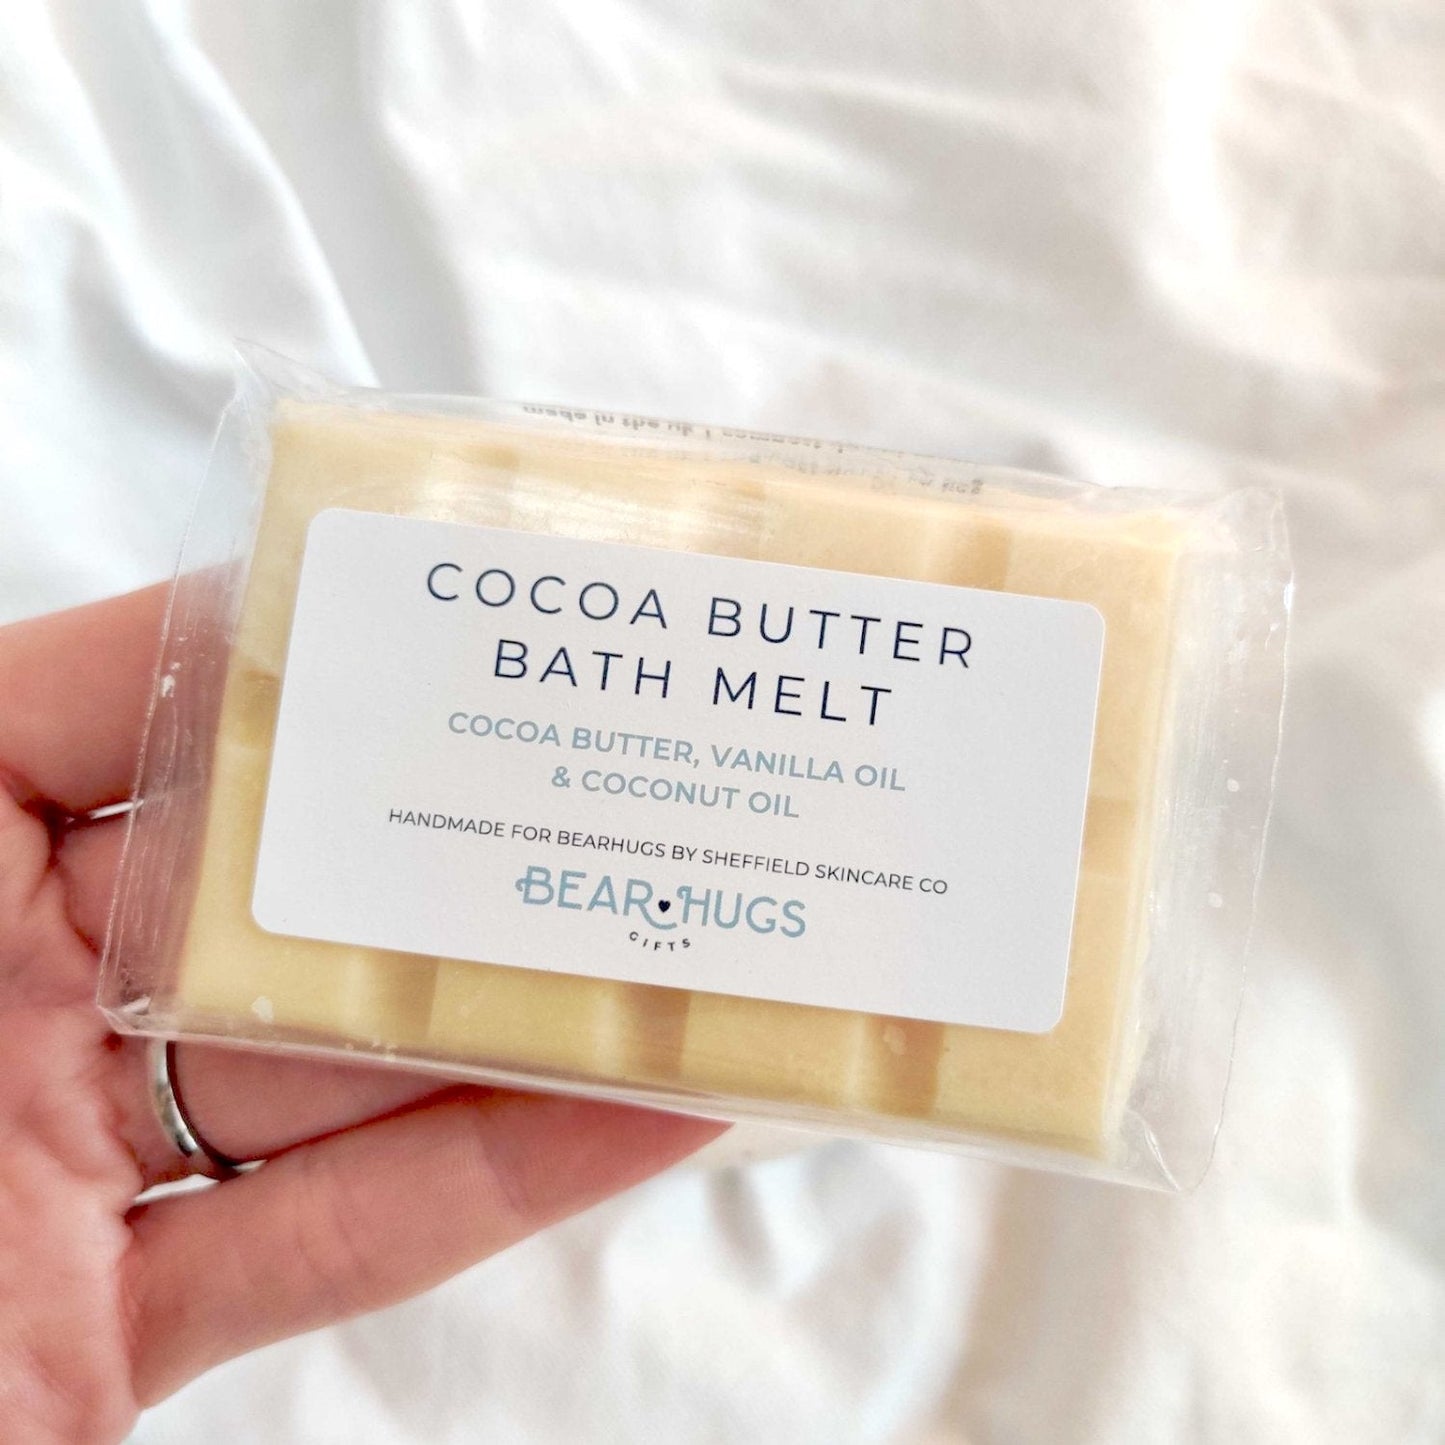 Cocoa Butter Bath Melt - My Store - thinking of you gifts by post